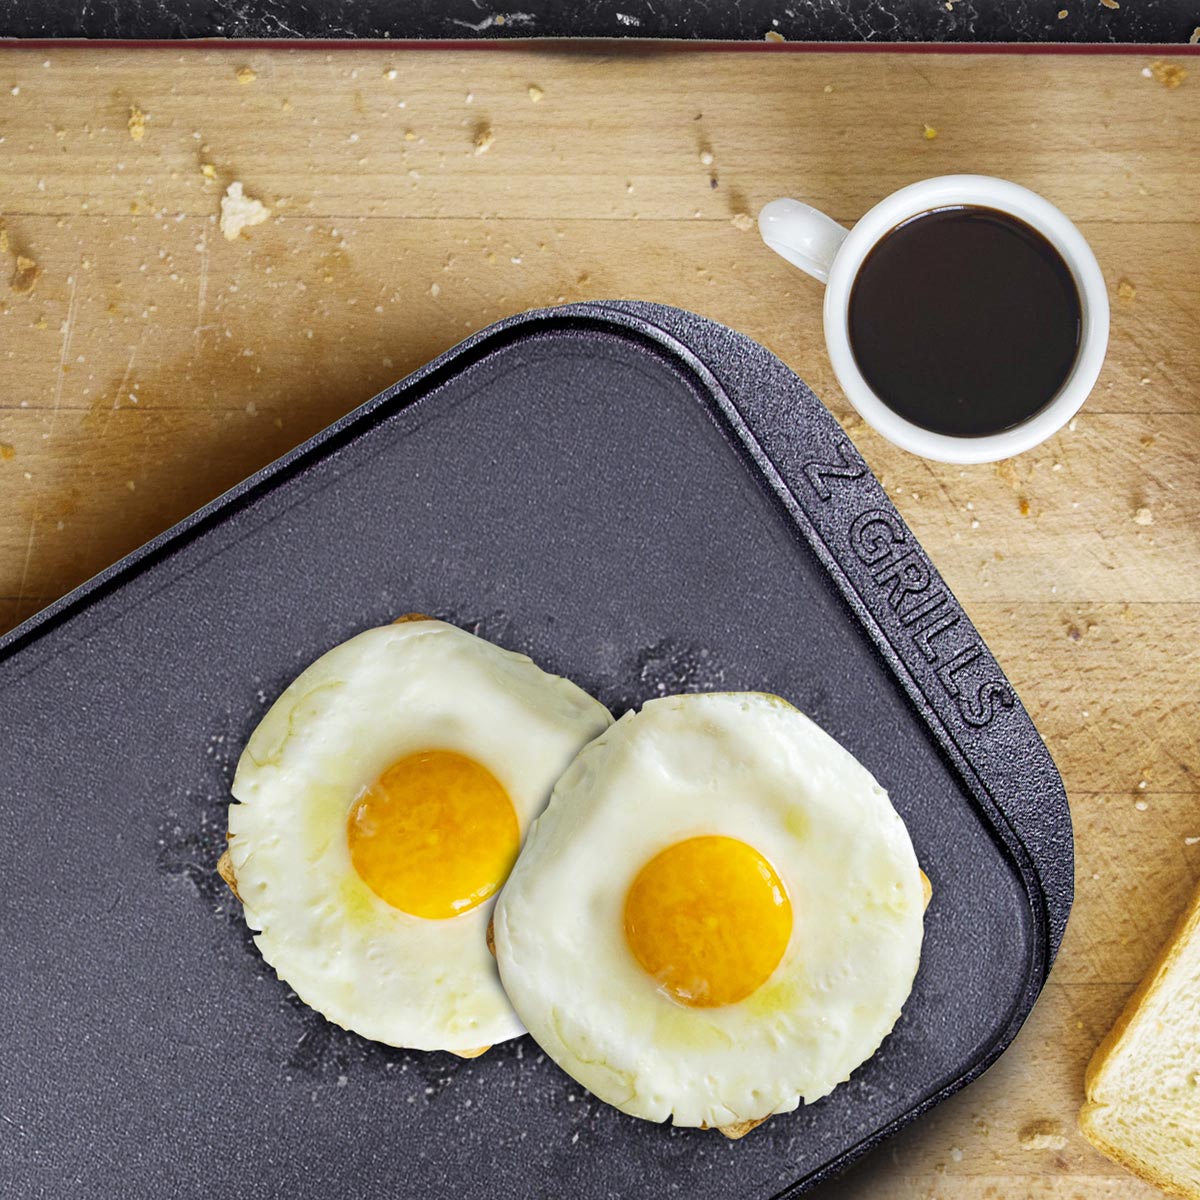 CAST IRON GRIDDLE FOR 700 SERIES